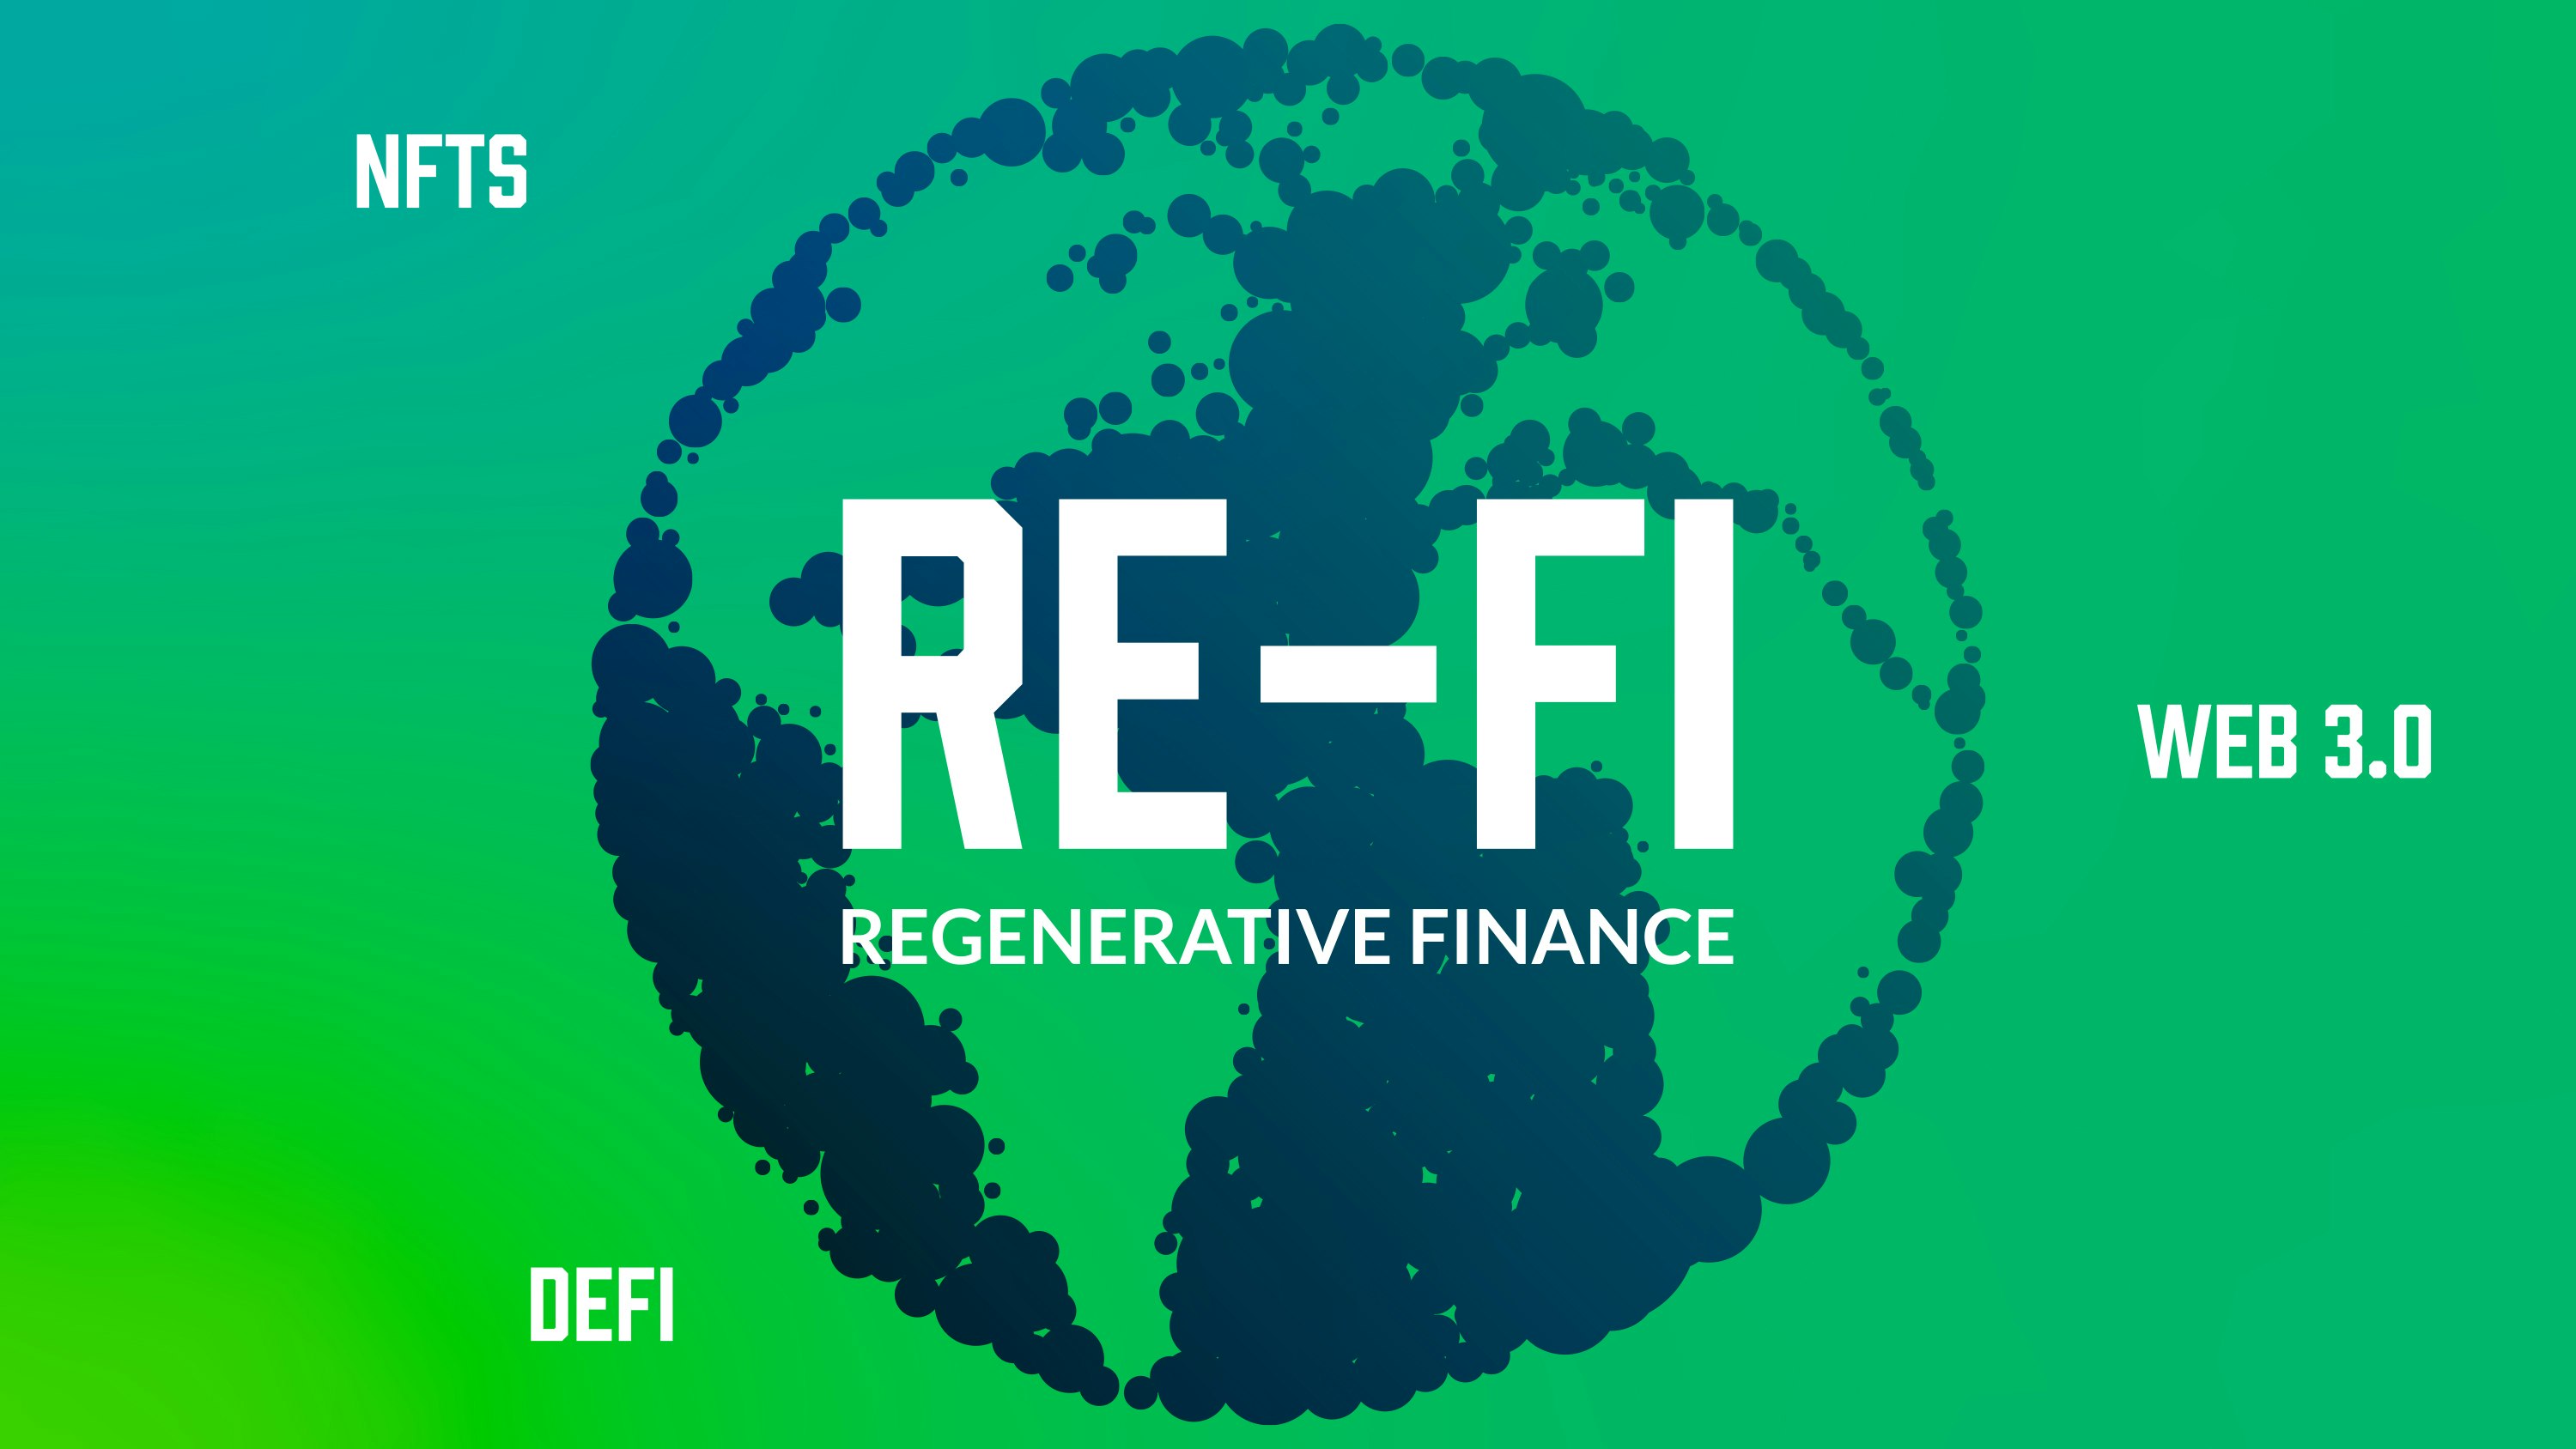 green graphic depicting planet earth with text saying regenerative finance and defi and web 3.0 and nfts in periphery